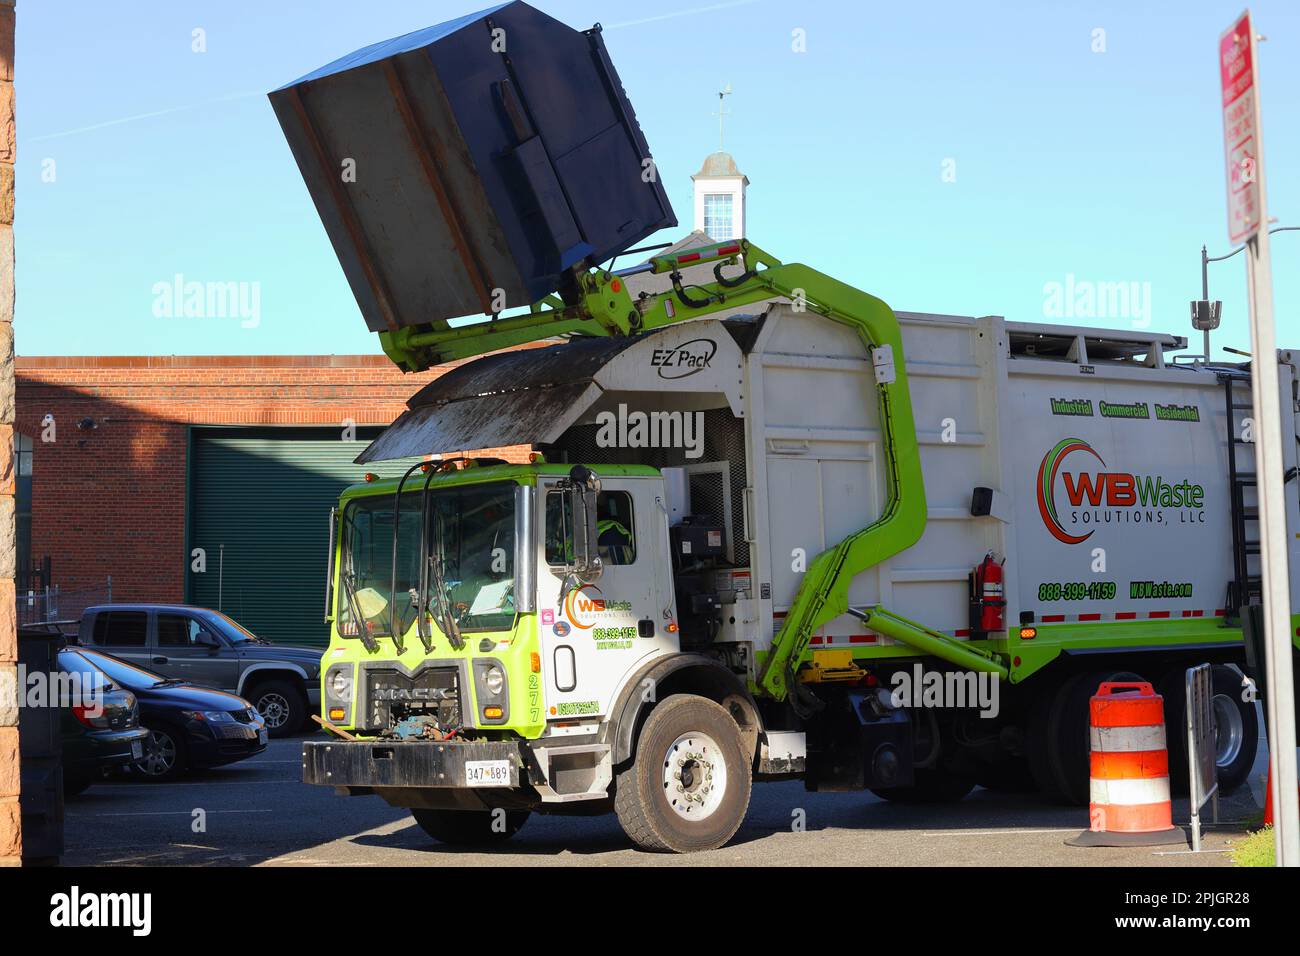 A WB Waste Solutions front load garbage truck with Hercules mechanism, EZ Pack body, and Mack Truck chassis lifts a 6 yd dumpster for trash removal. Stock Photo